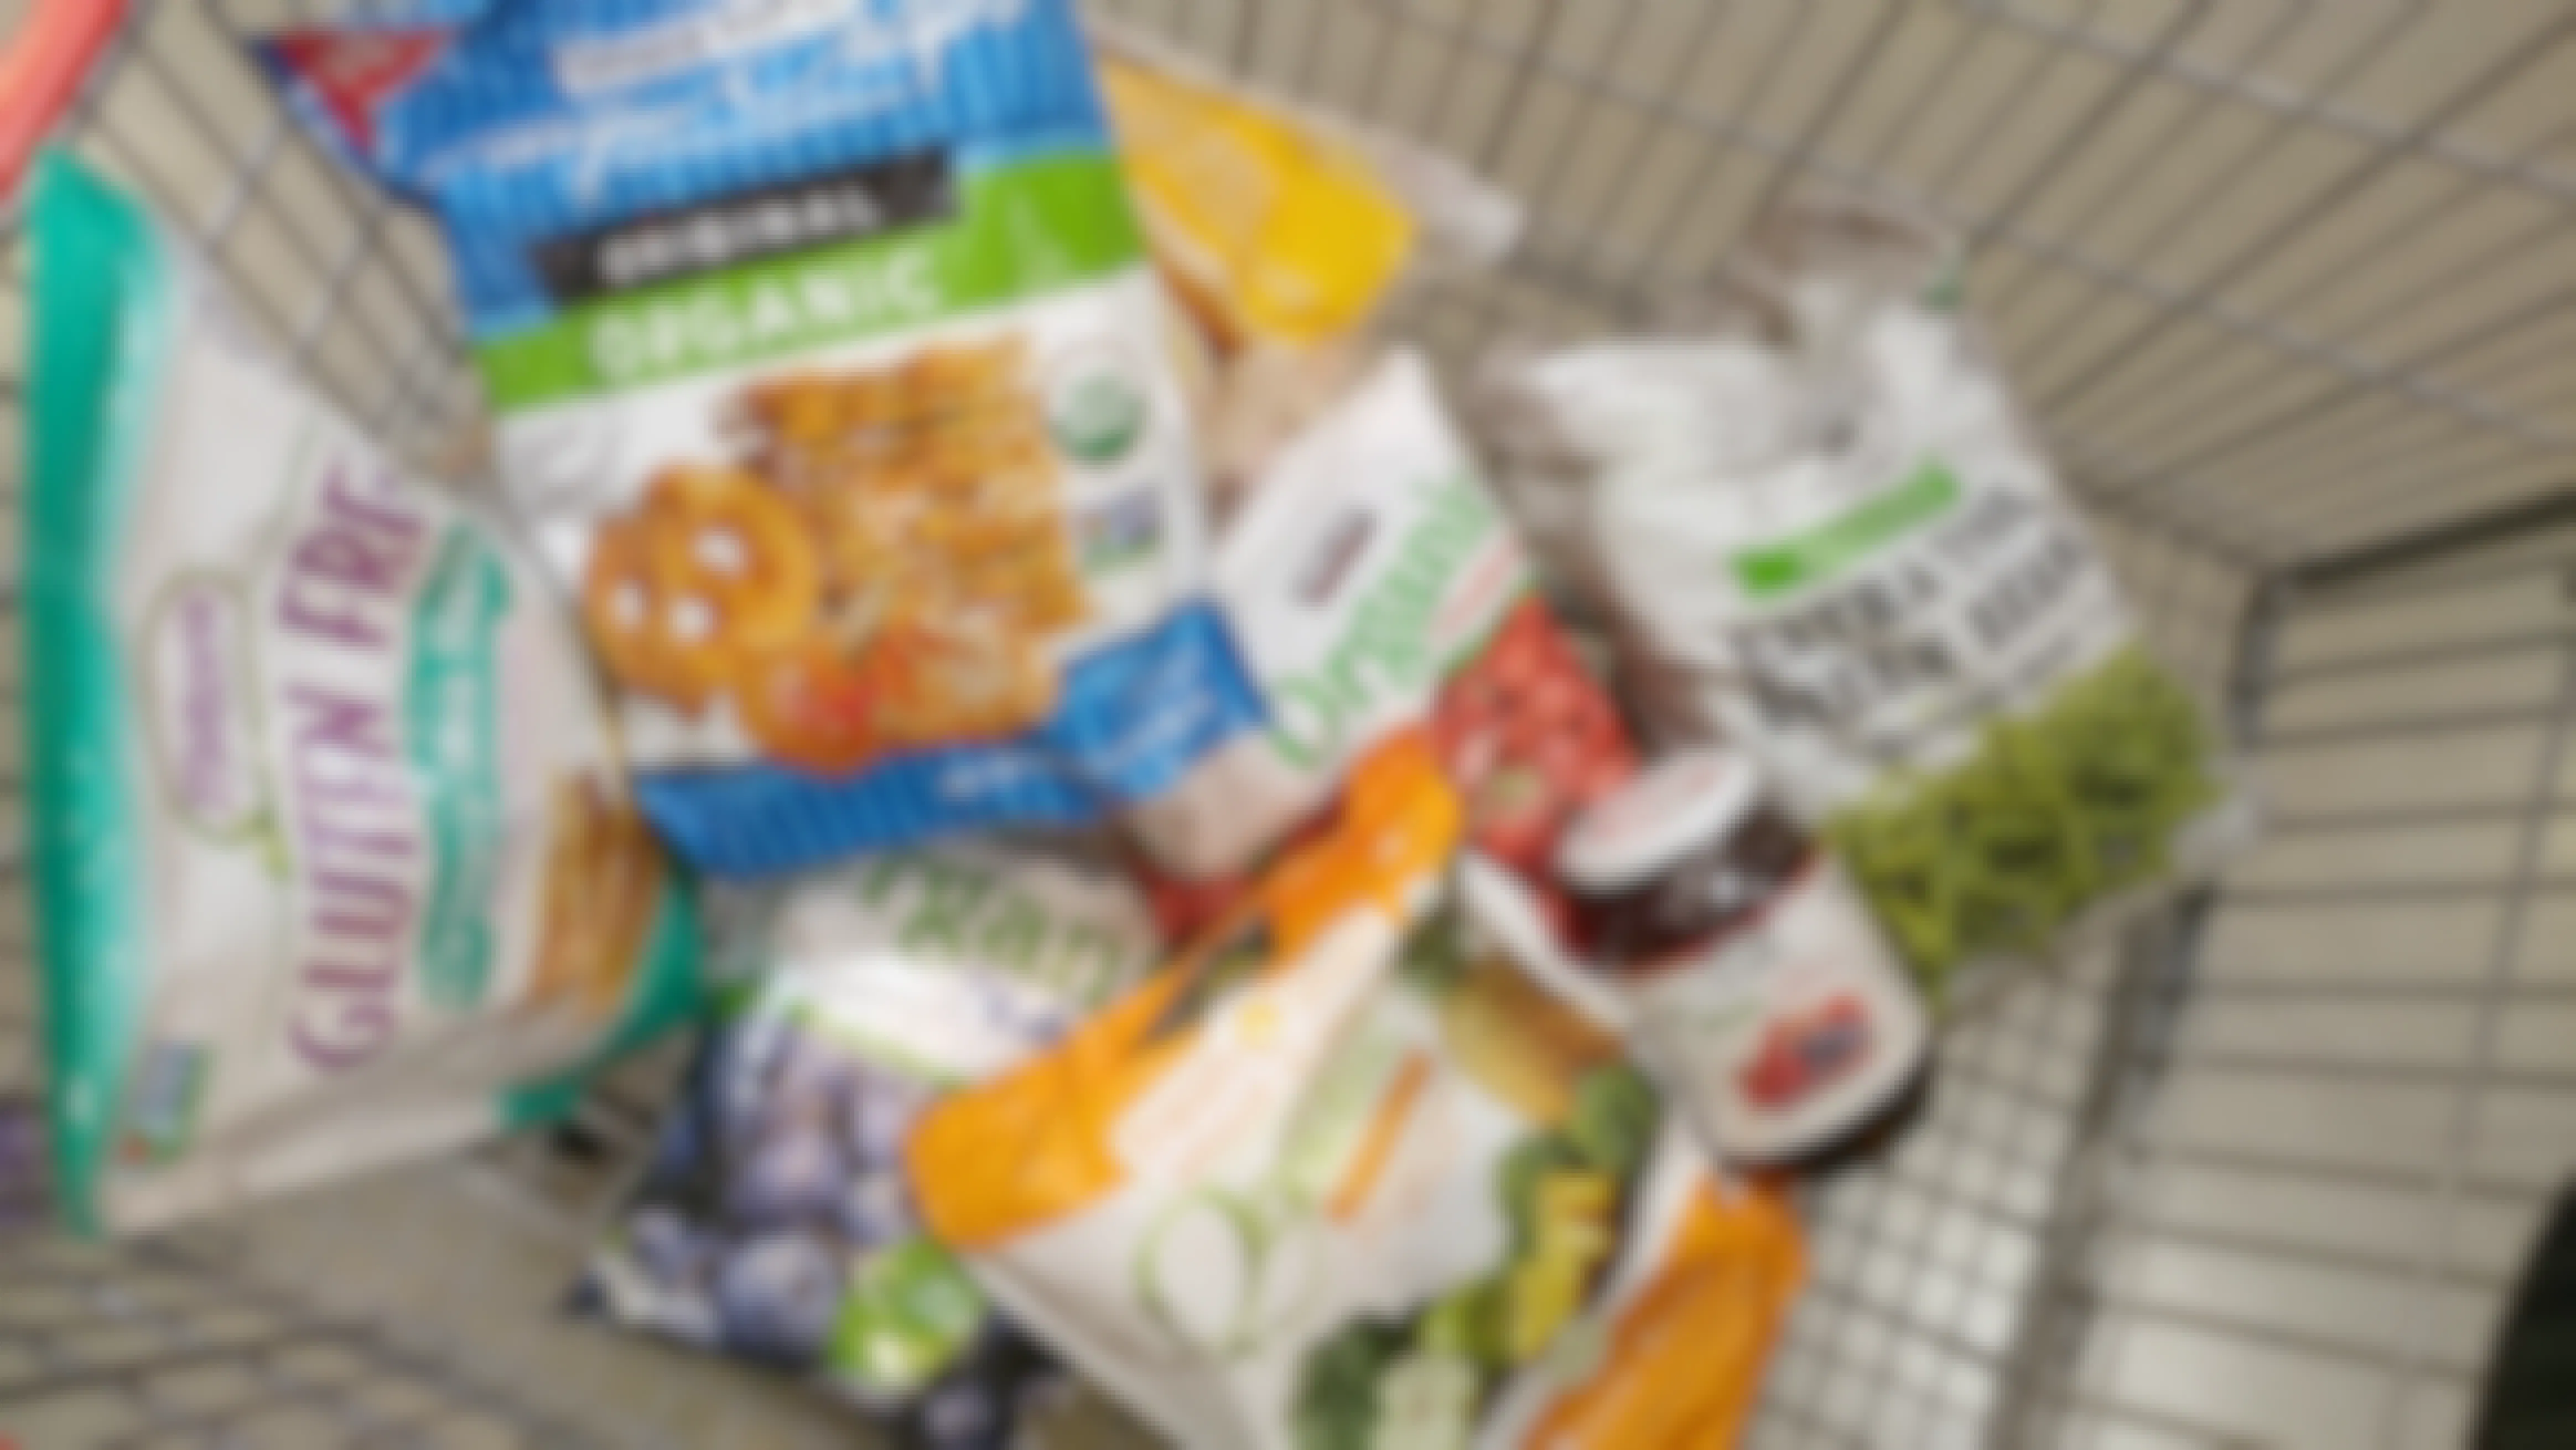 How to Shop for Healthy Food on a Budget